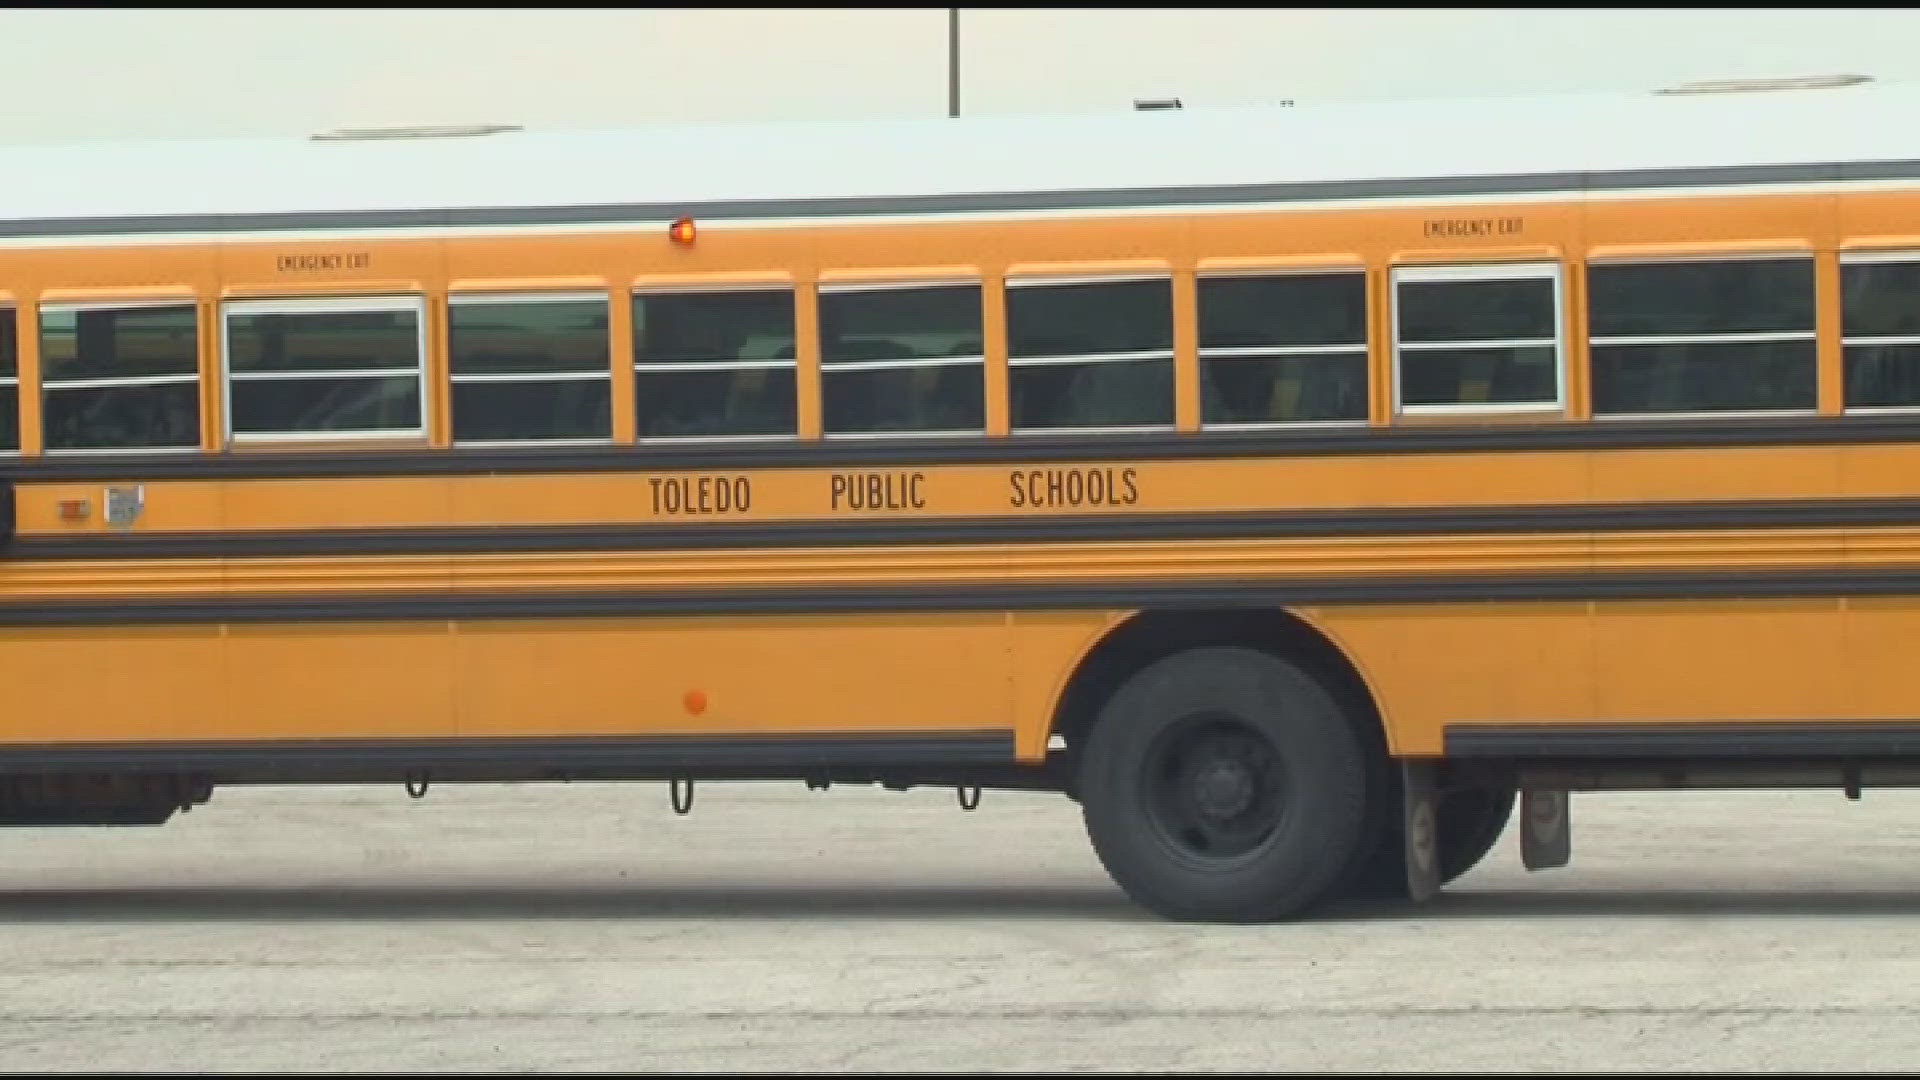 Toledo Public Schools will begin classes on Aug. 19. Prior to that, there's a transportation deadline fast approaching that parents need to know about.